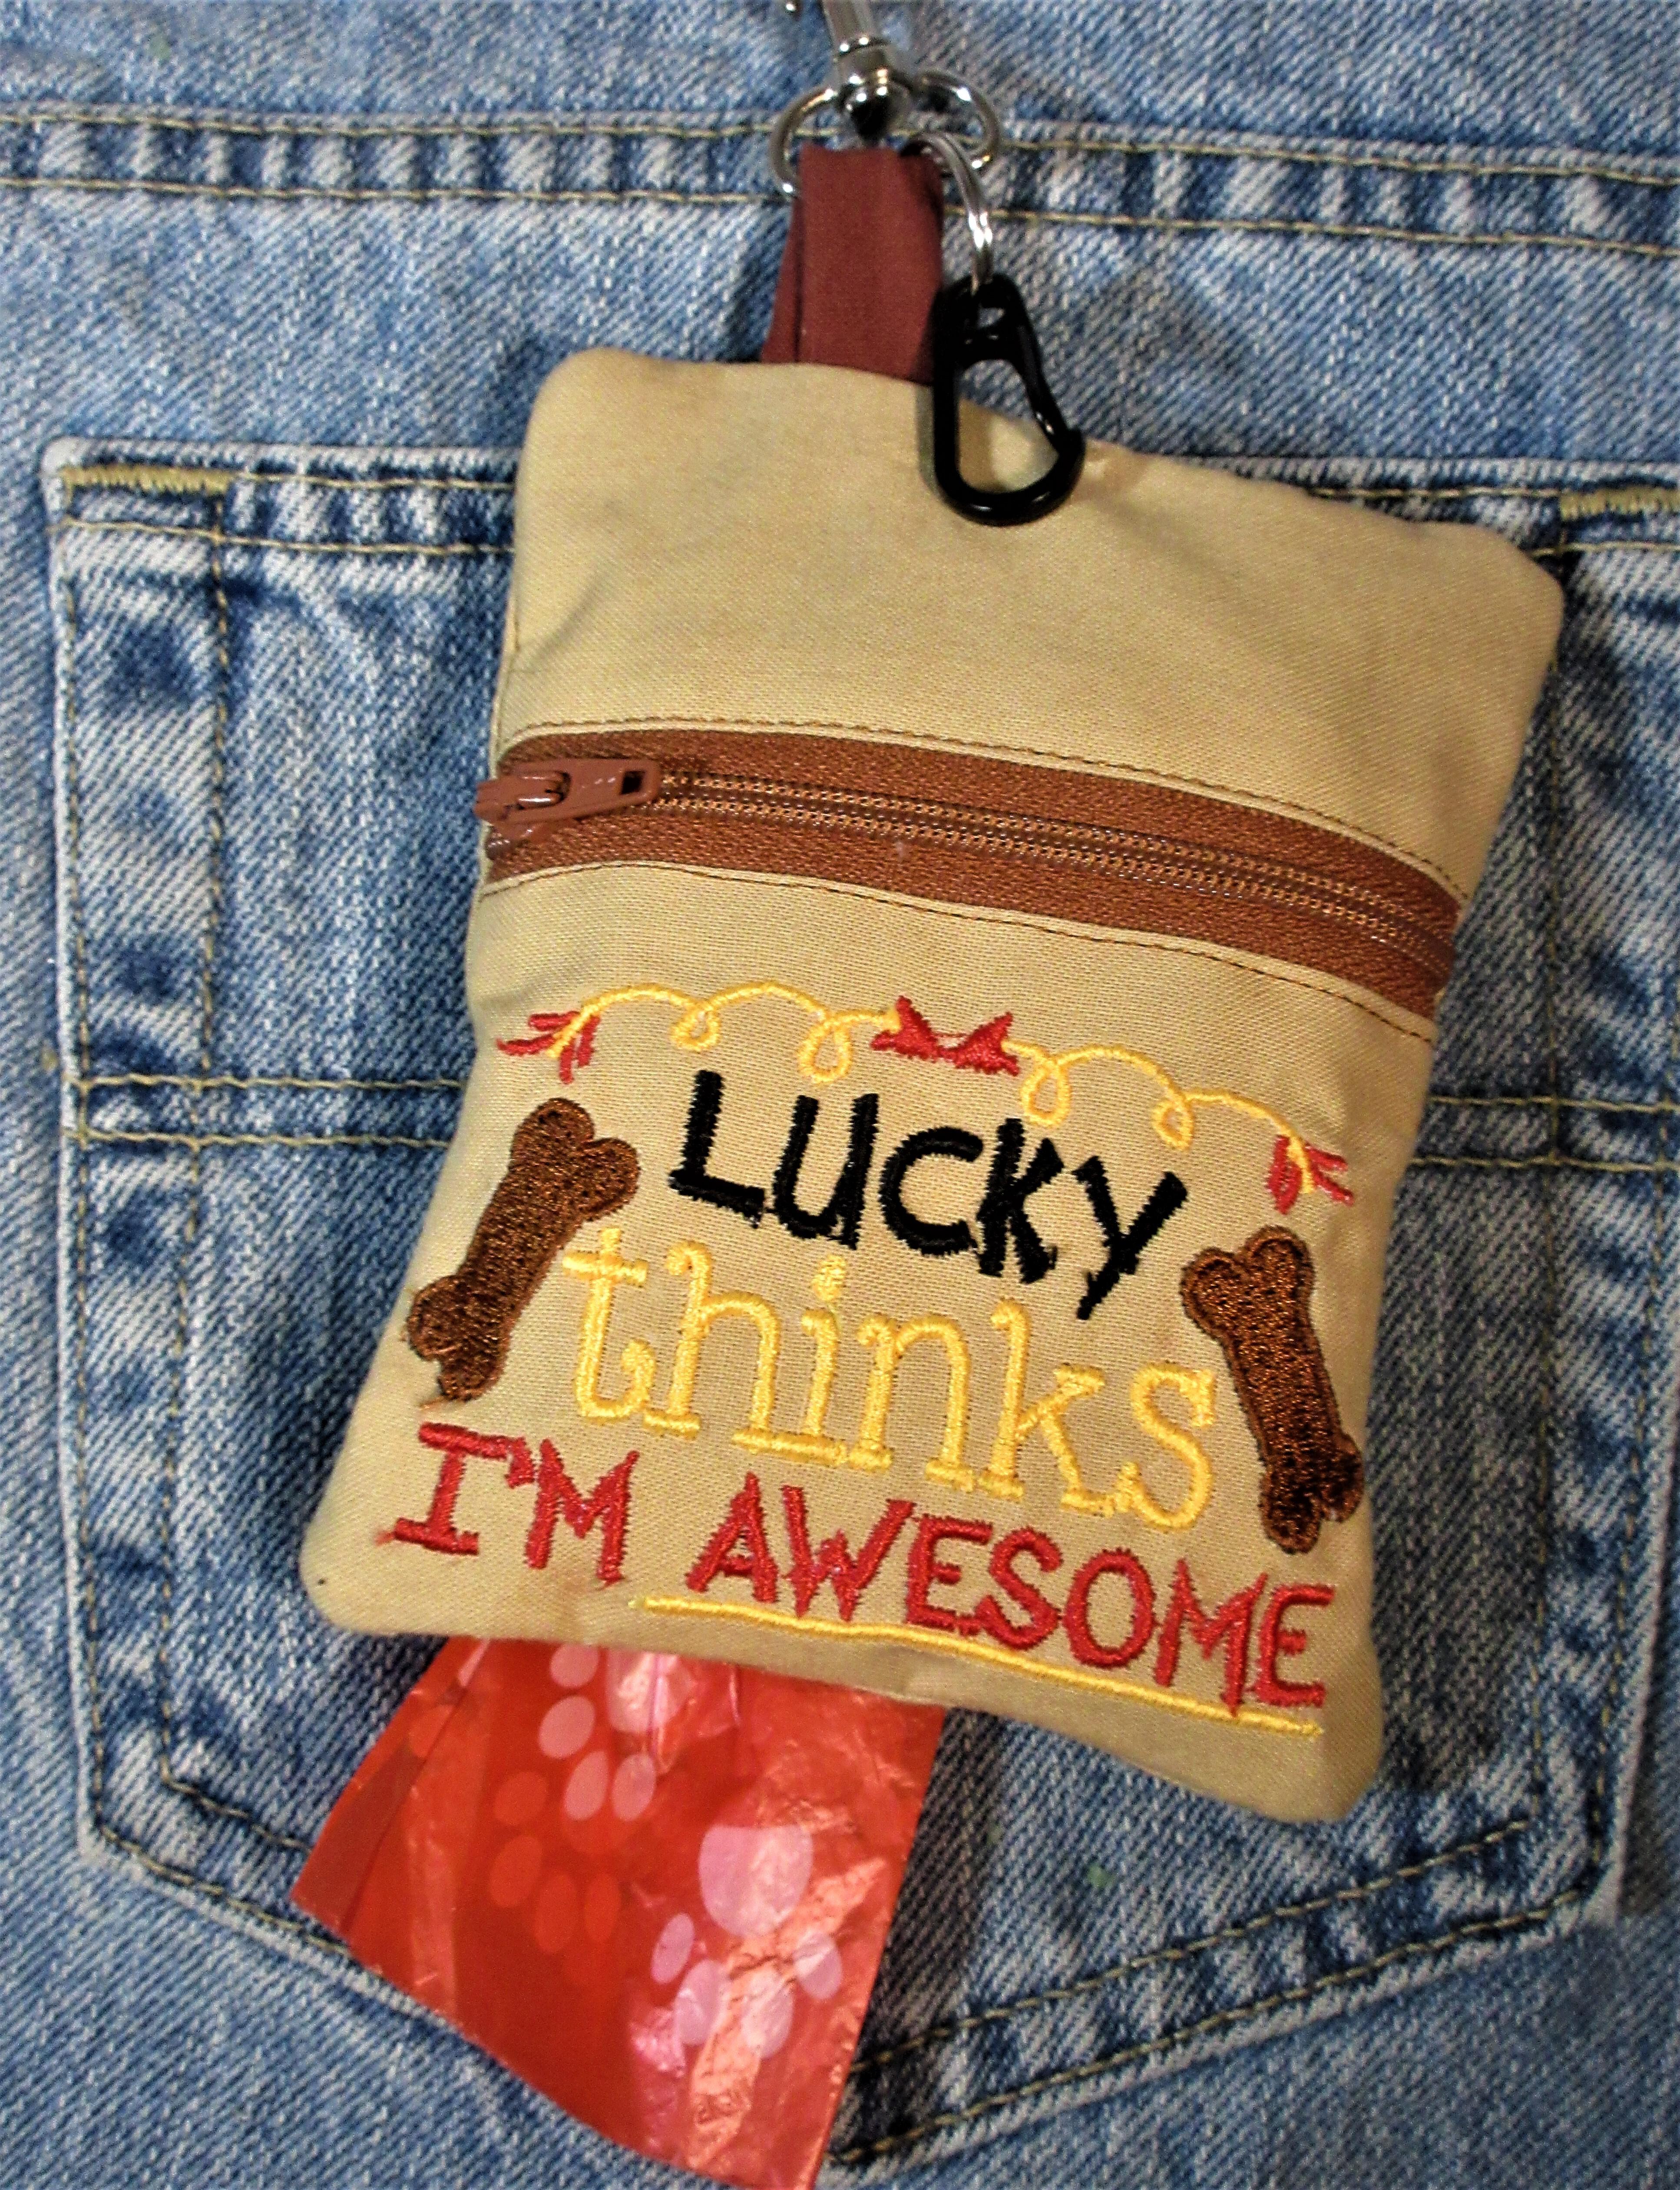 my dog mom thinks i am awesome poop bag holder handcrafted in USA by A  Fur Baby Favorite